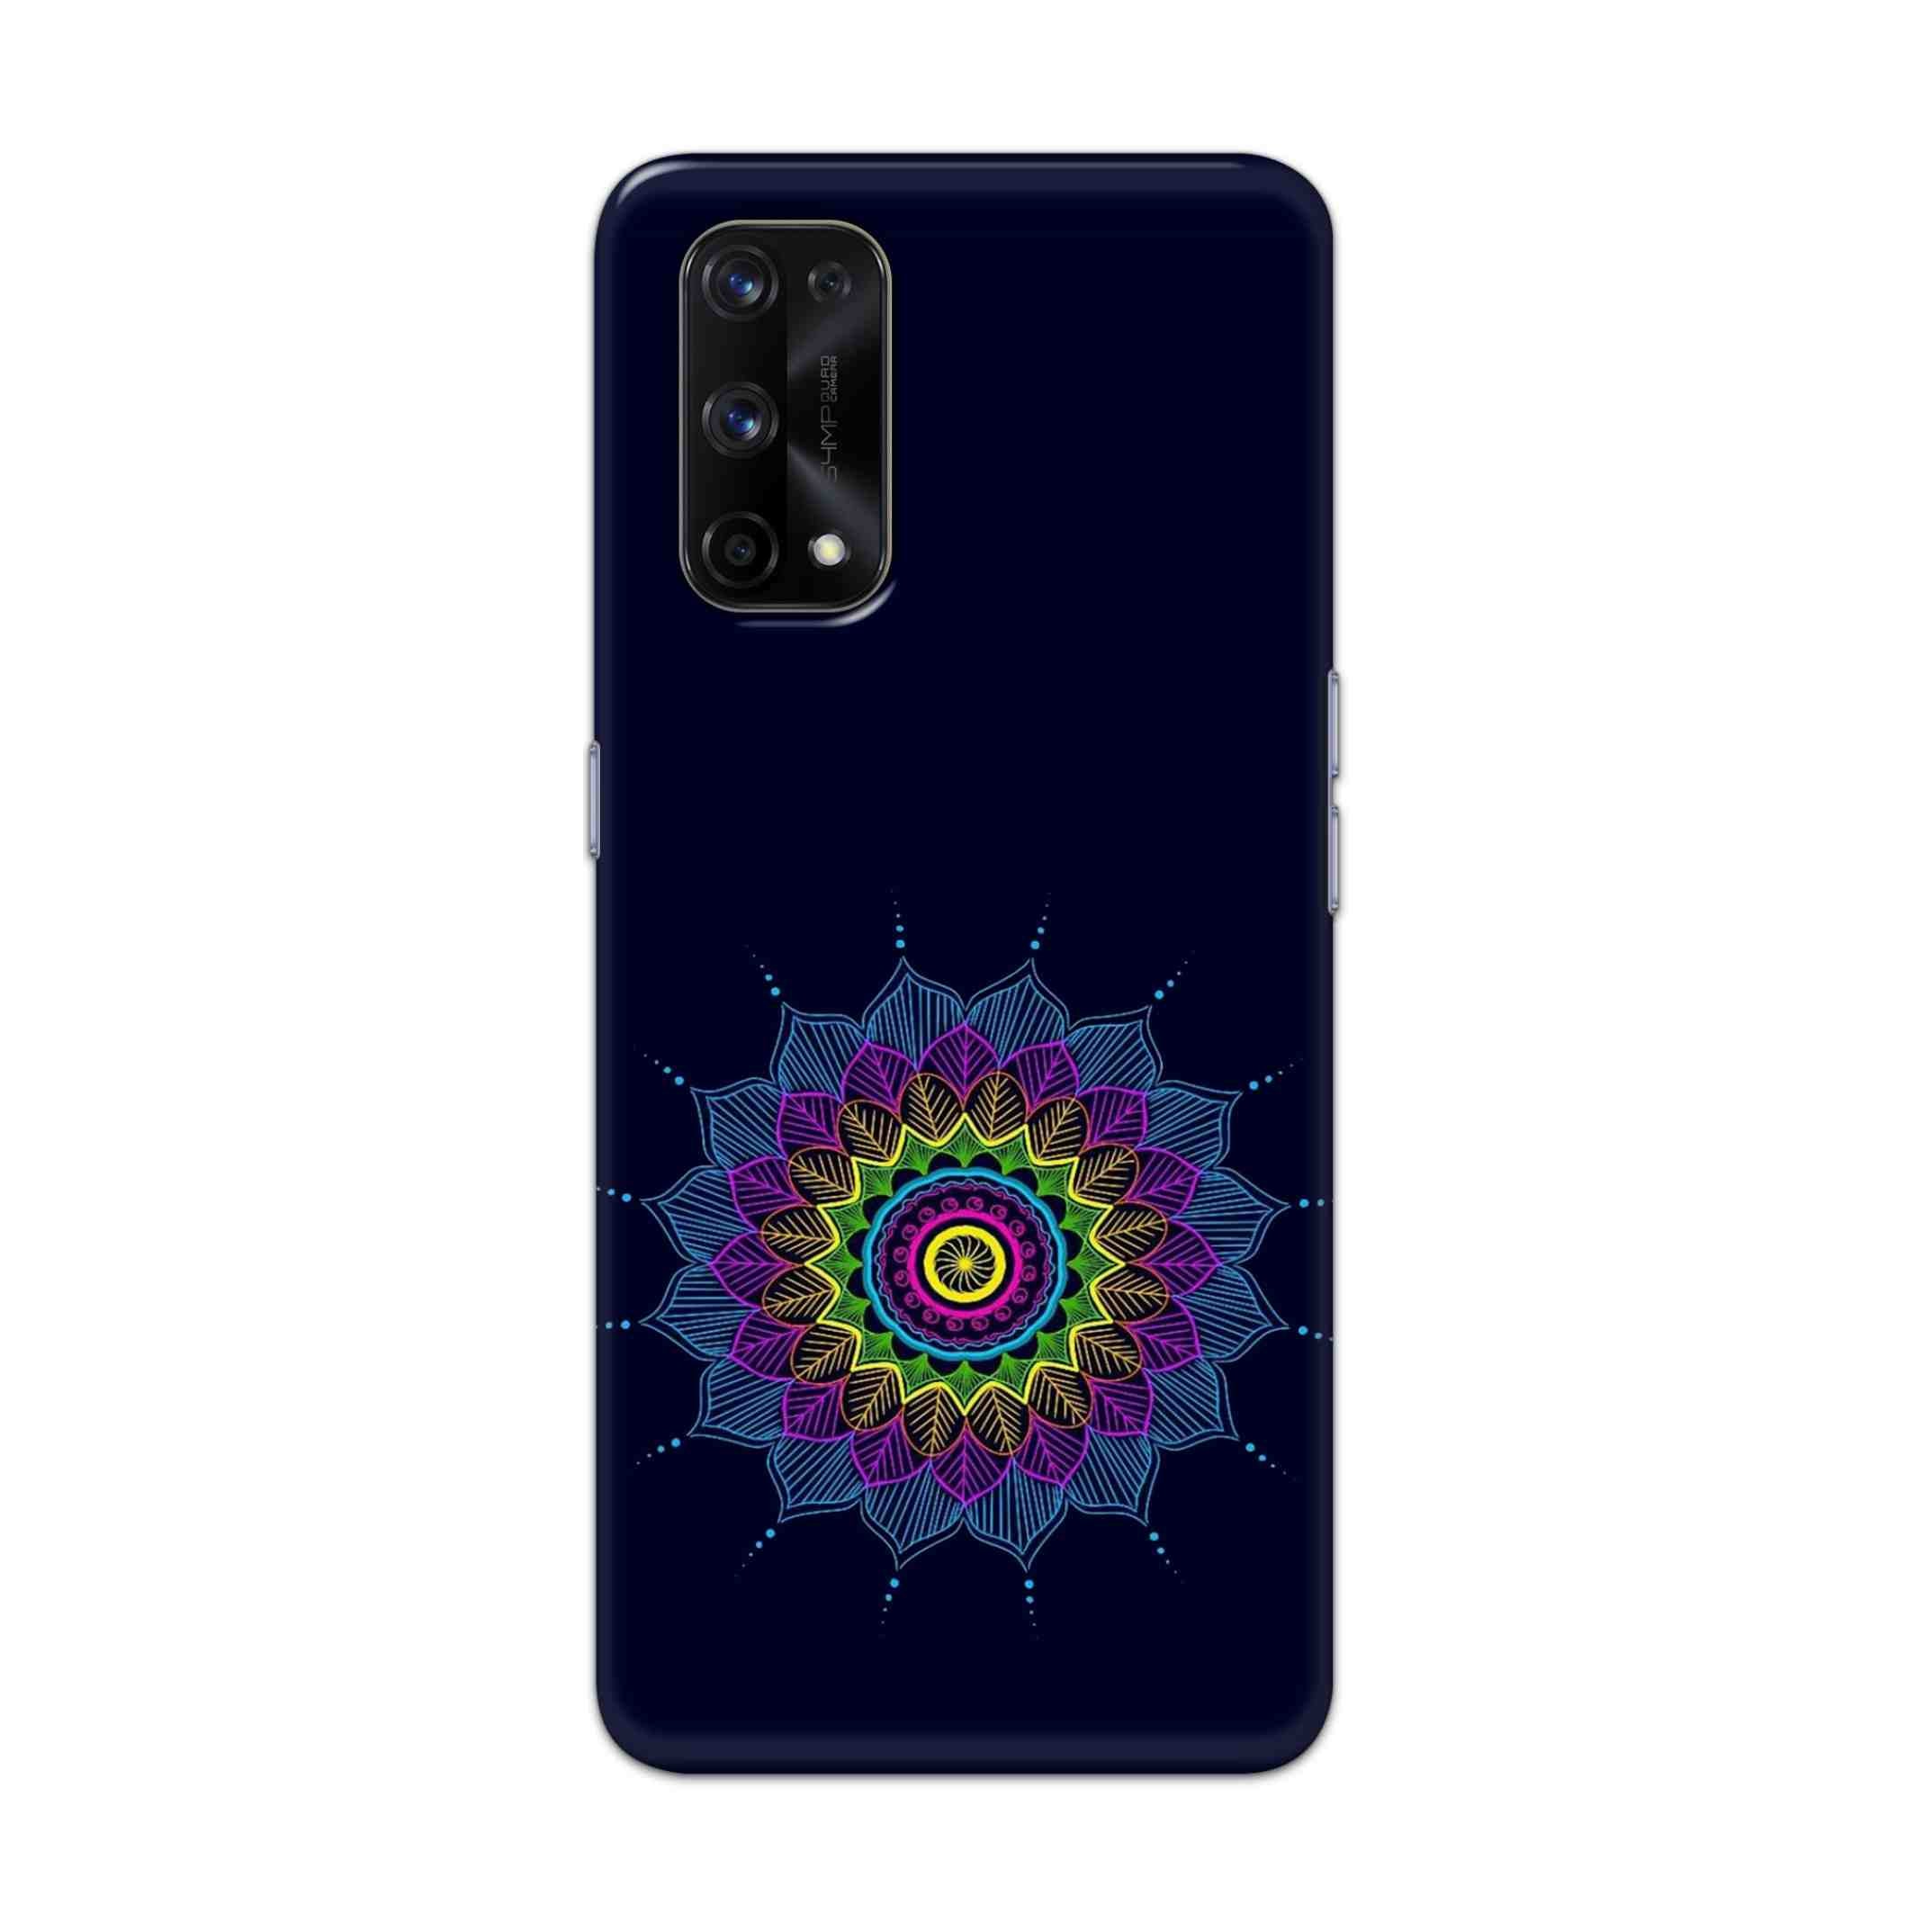 Buy Jung And Mandalas Hard Back Mobile Phone Case Cover For Realme X7 Pro Online